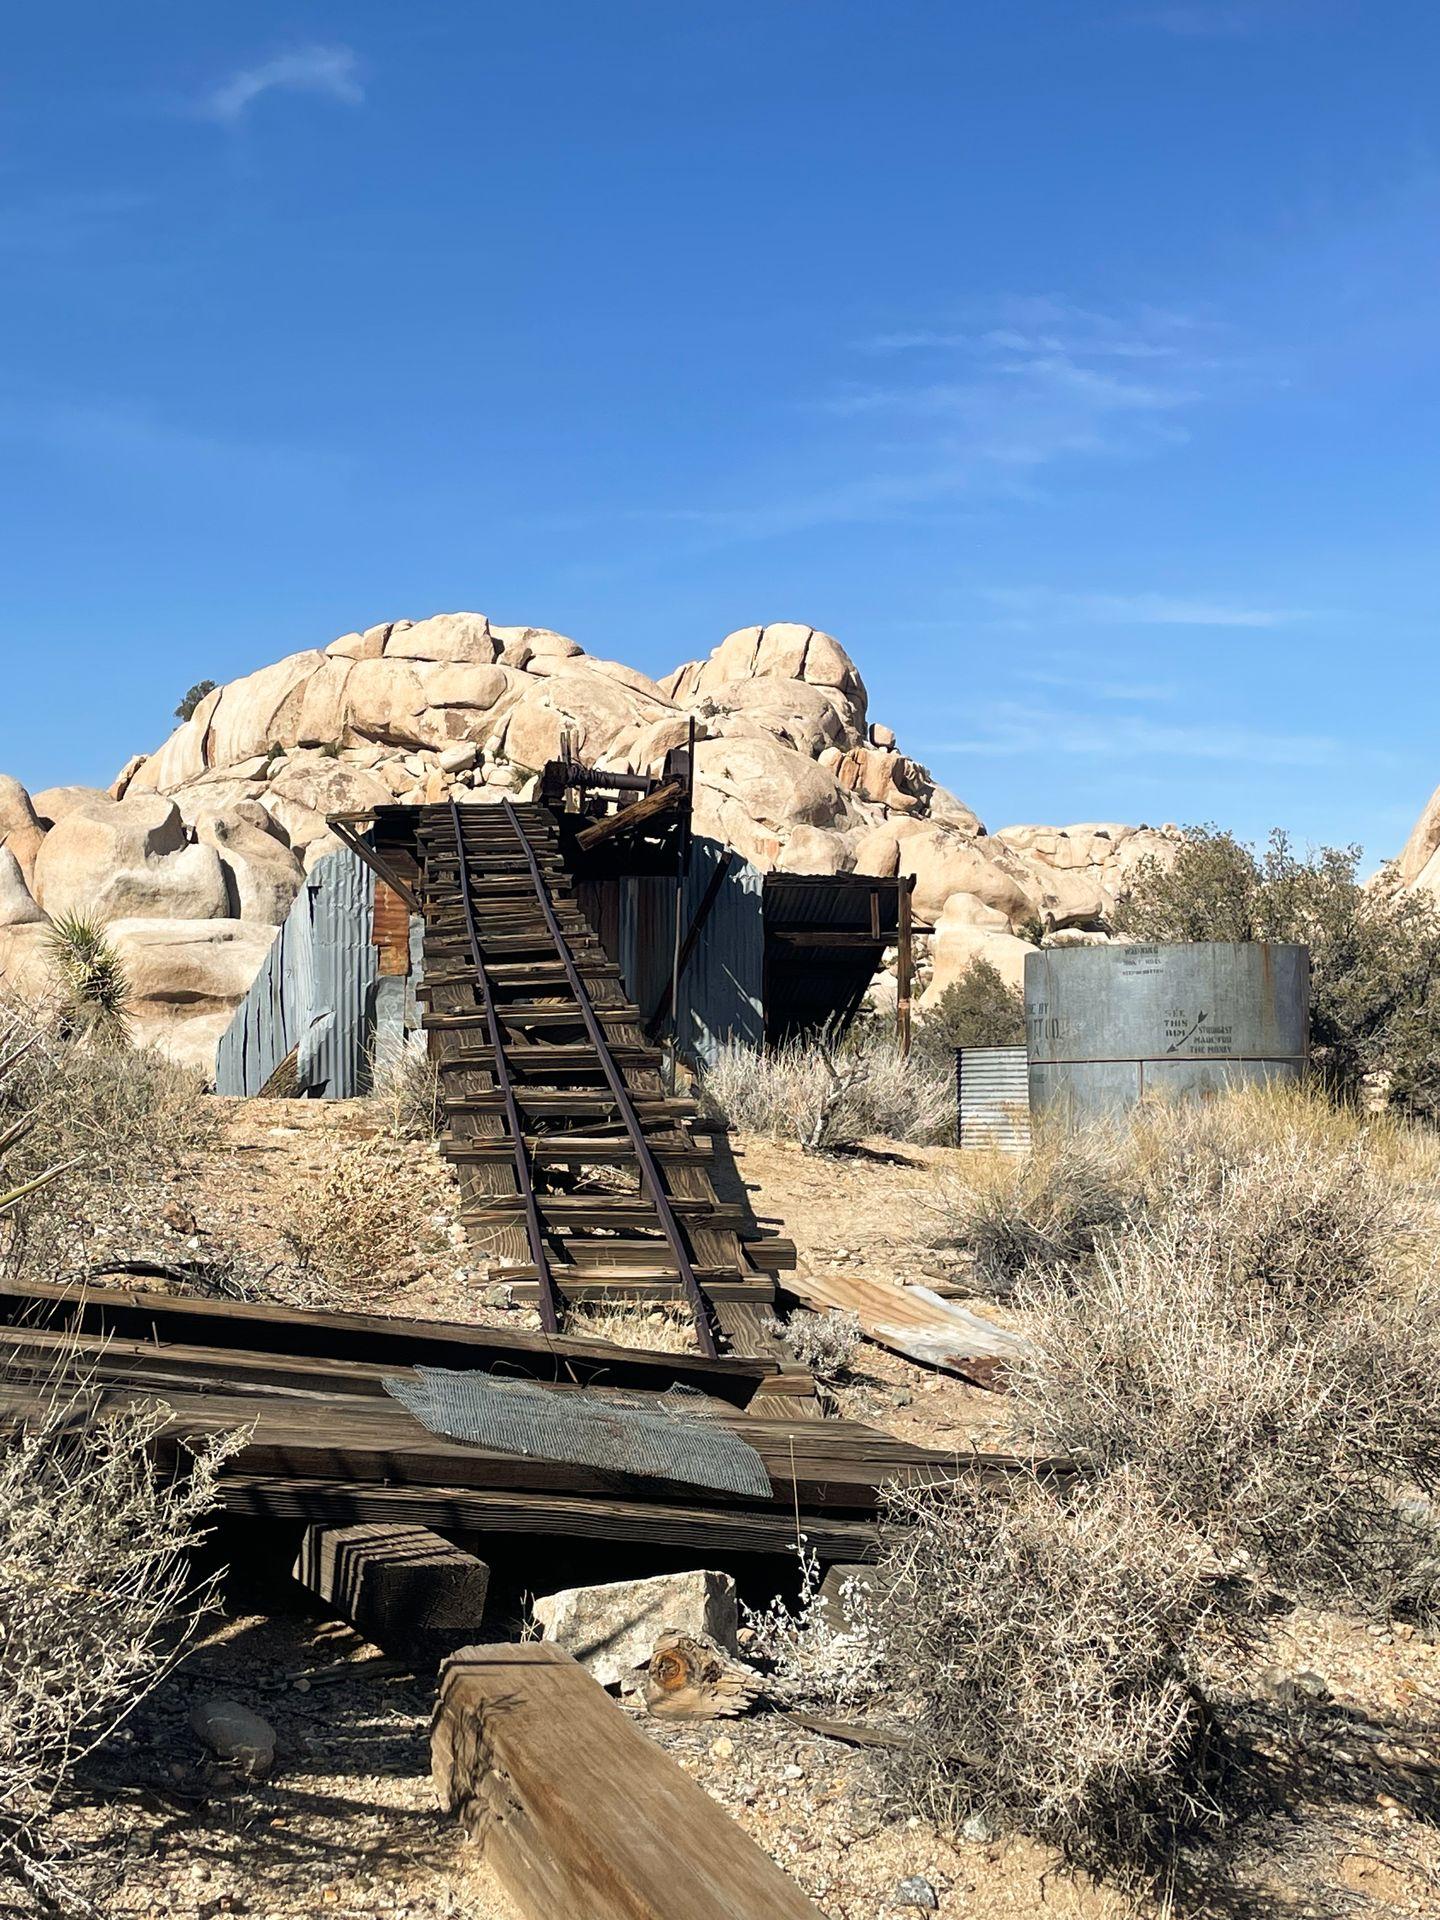 Former mining ruins that include a tilted wooden chute and silver structures. There is a pile of tan boulders in the background.